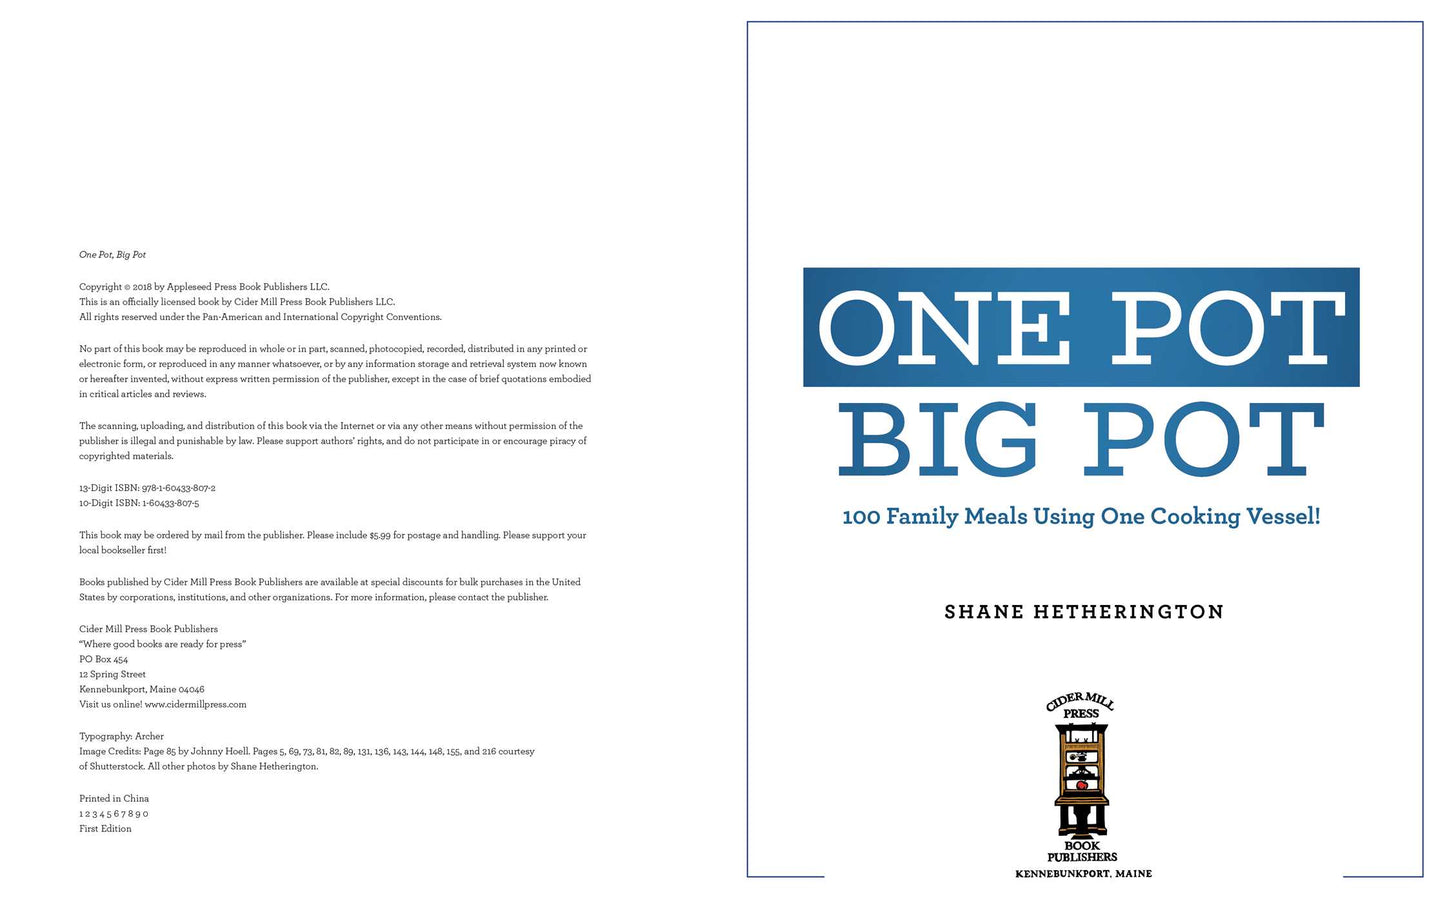 One Pot Big Pot Family Meals: More Than 100 Easy, Family-Sized Recipes Using a Single Vessel